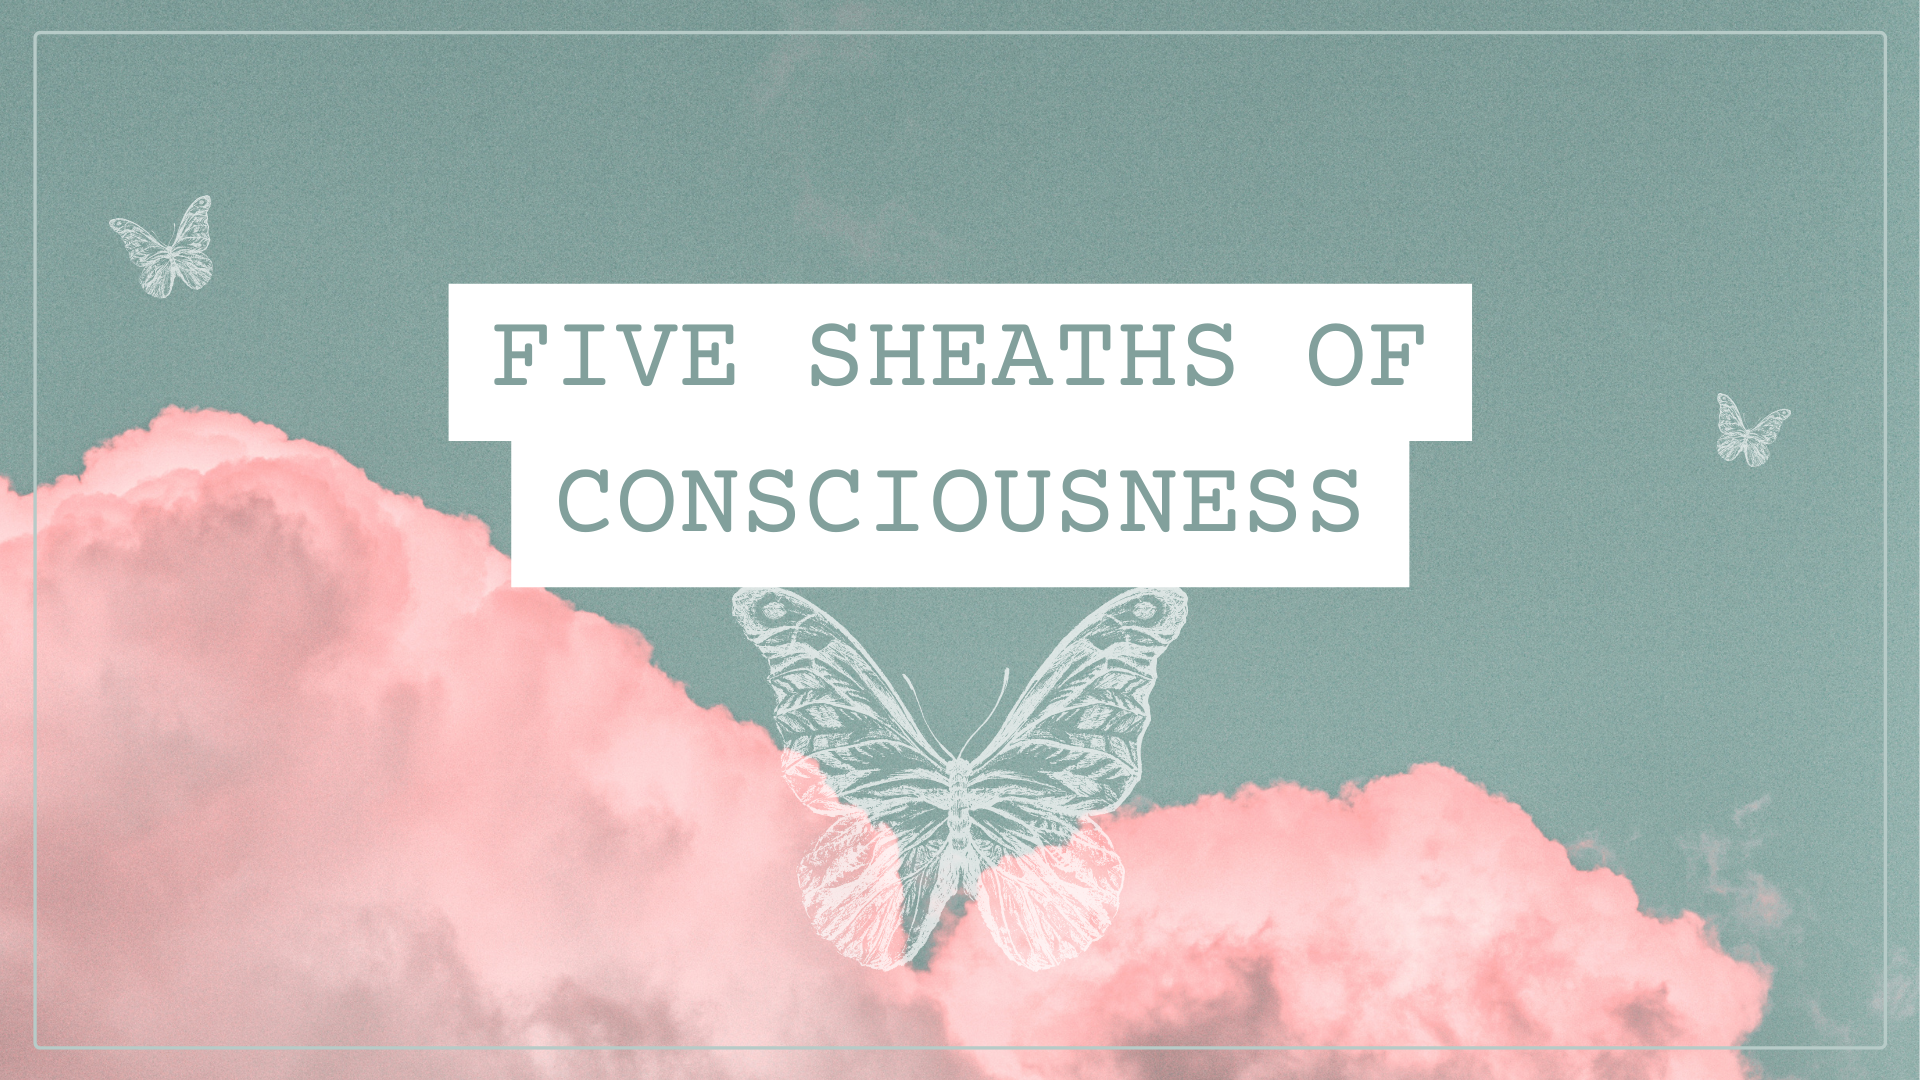 The Five Sheaths of Existence